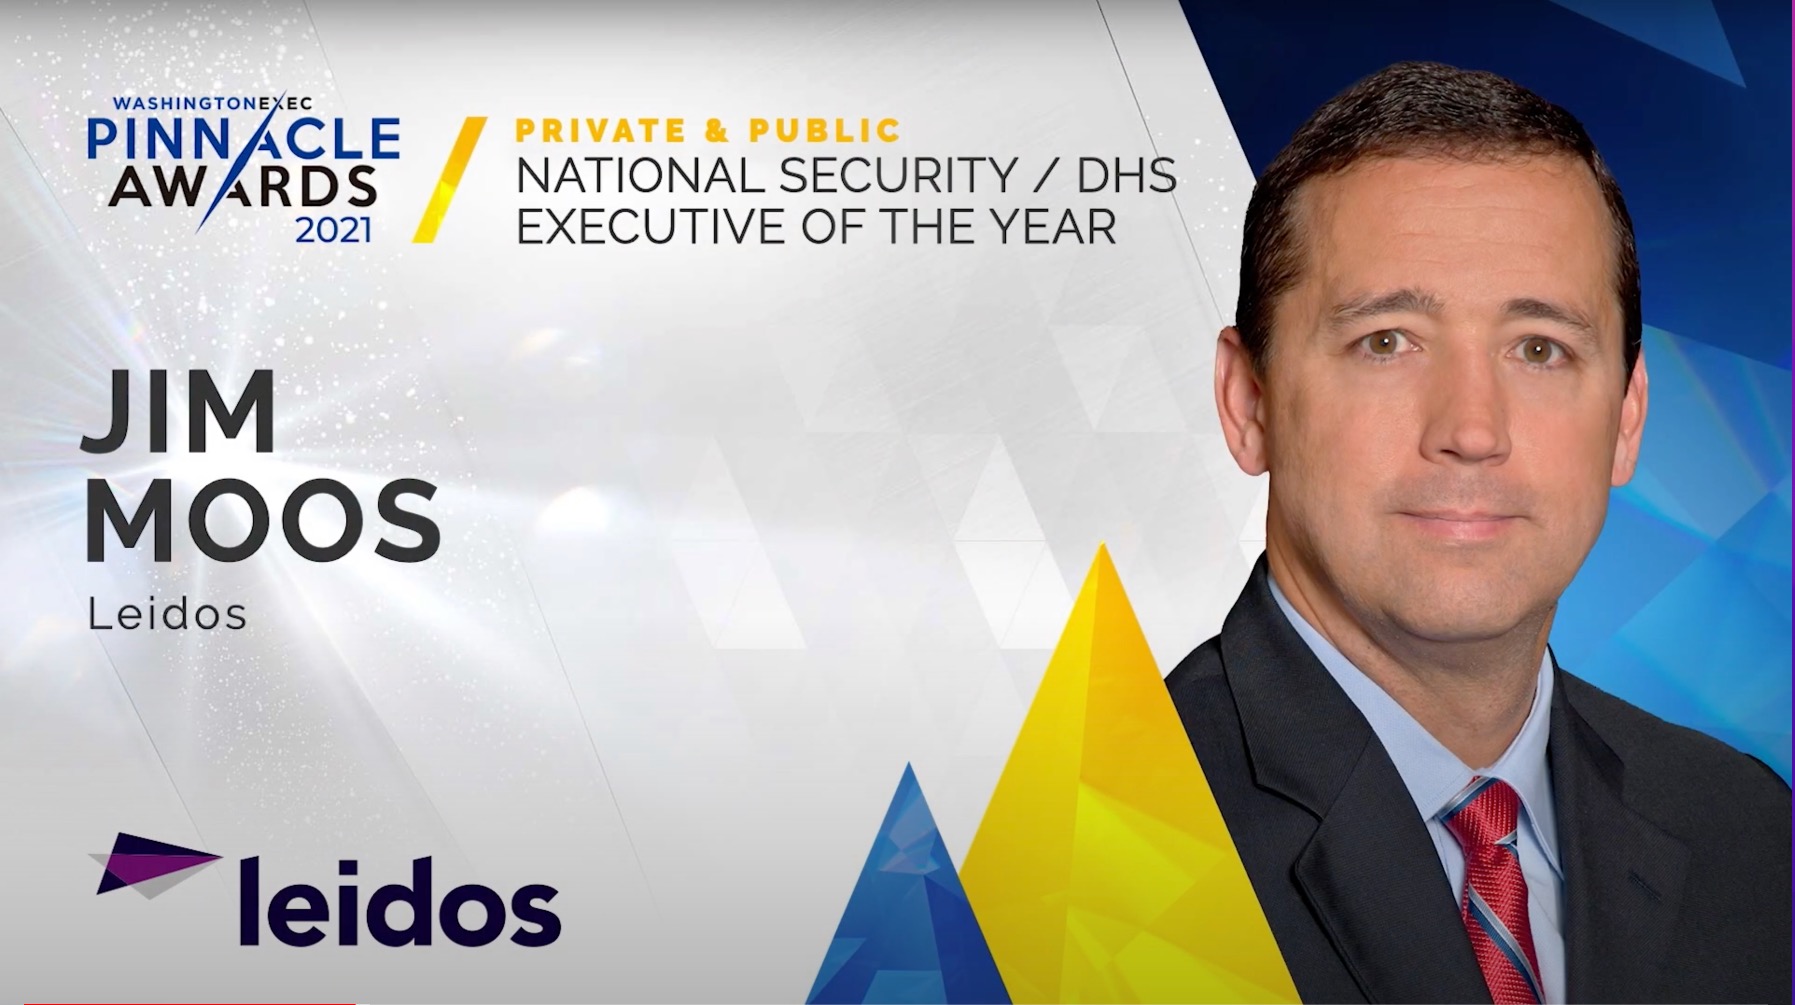 National Security - Congratulations to Jim Moos from Leidos on winning the award for National Security:DHS Executive of the Year